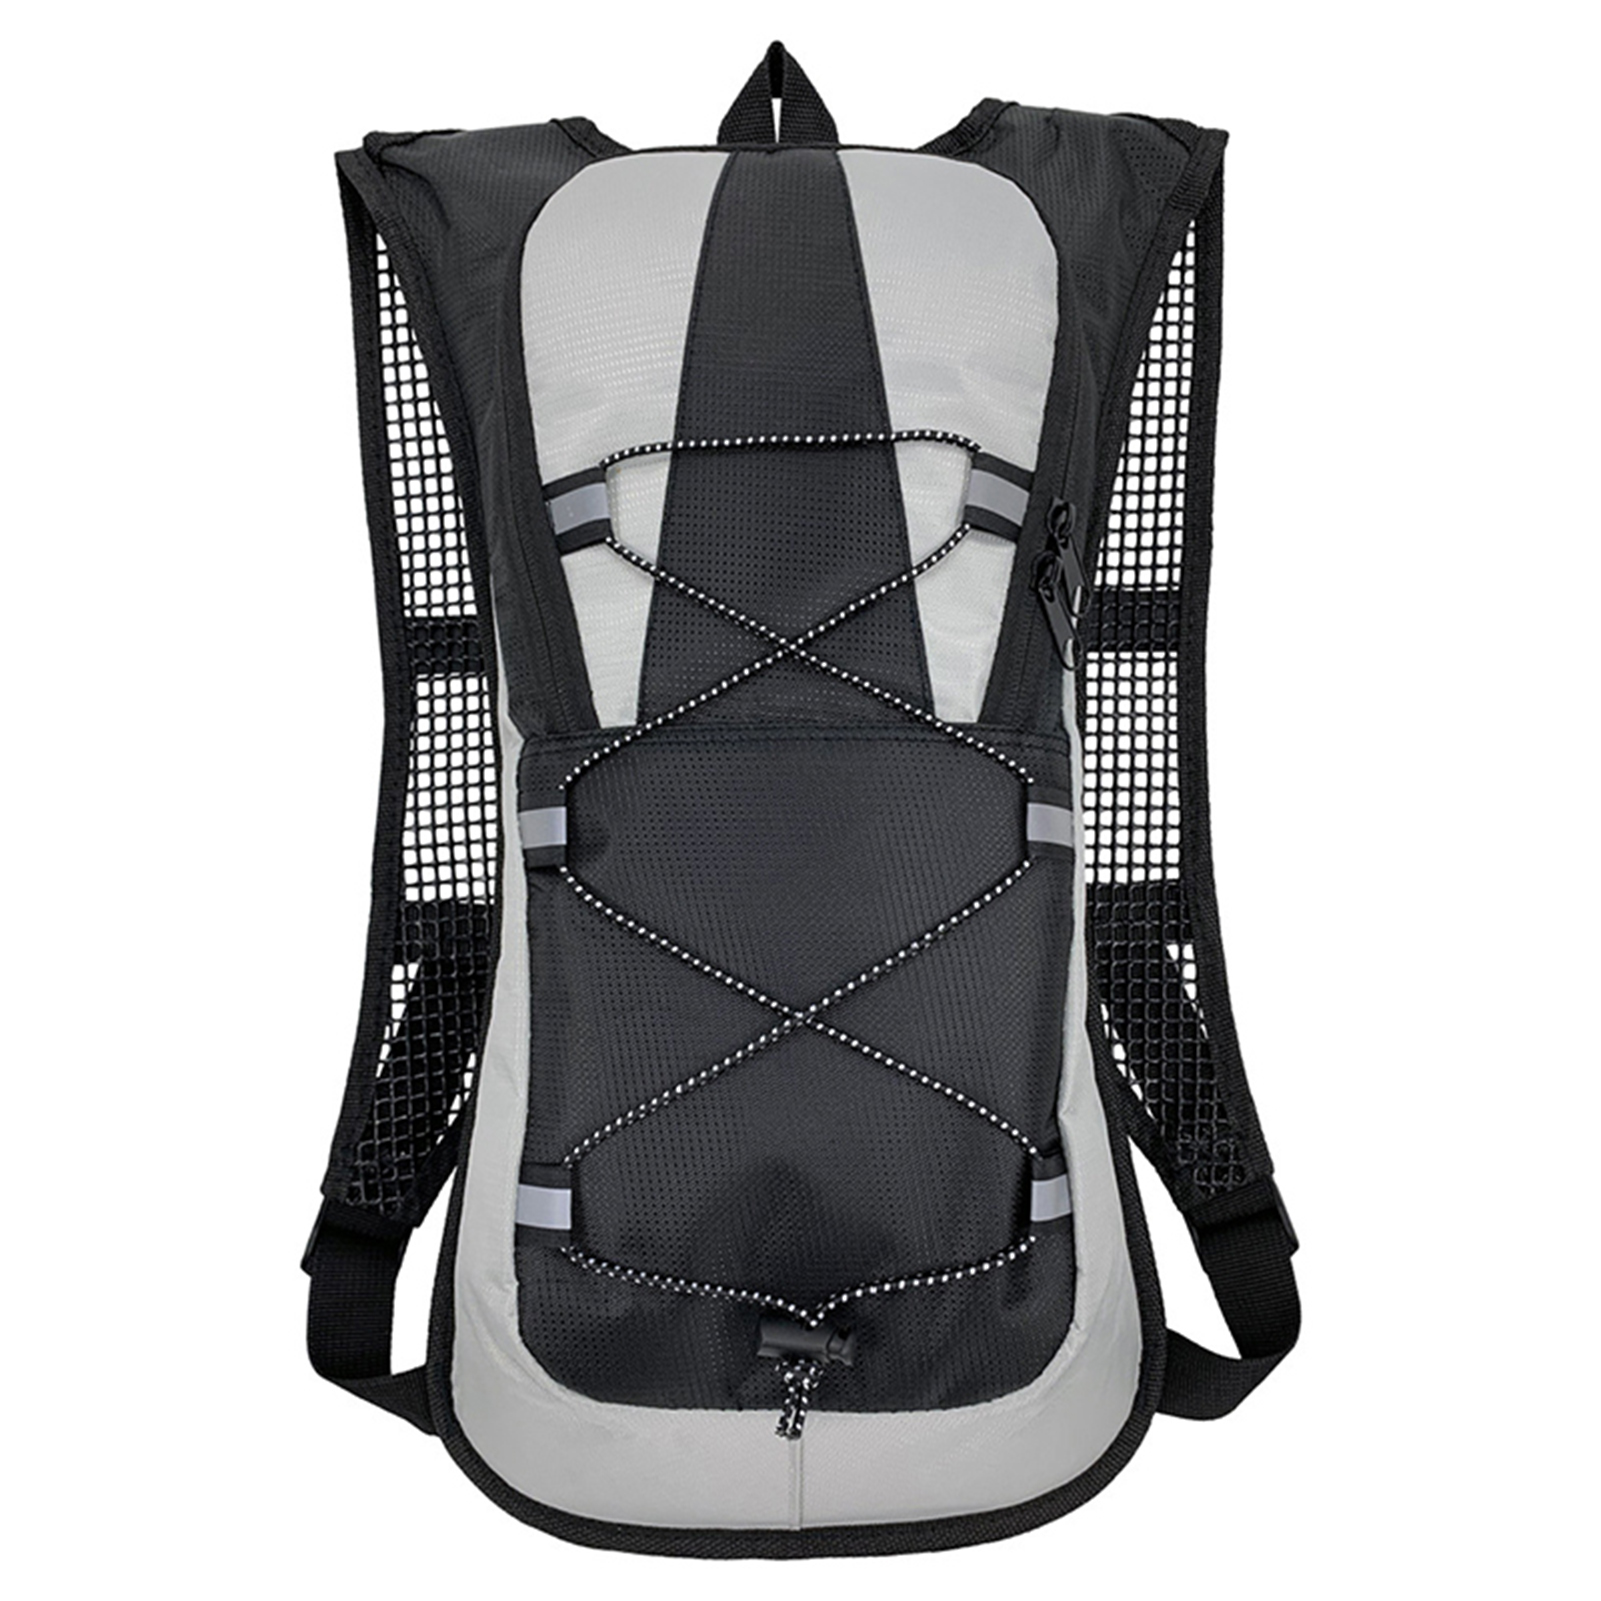 Ultralight Hydration Backpack with Hydration Bladder 5L for Running Hiking Cycling Climbing Camping Biking - image 1 of 4